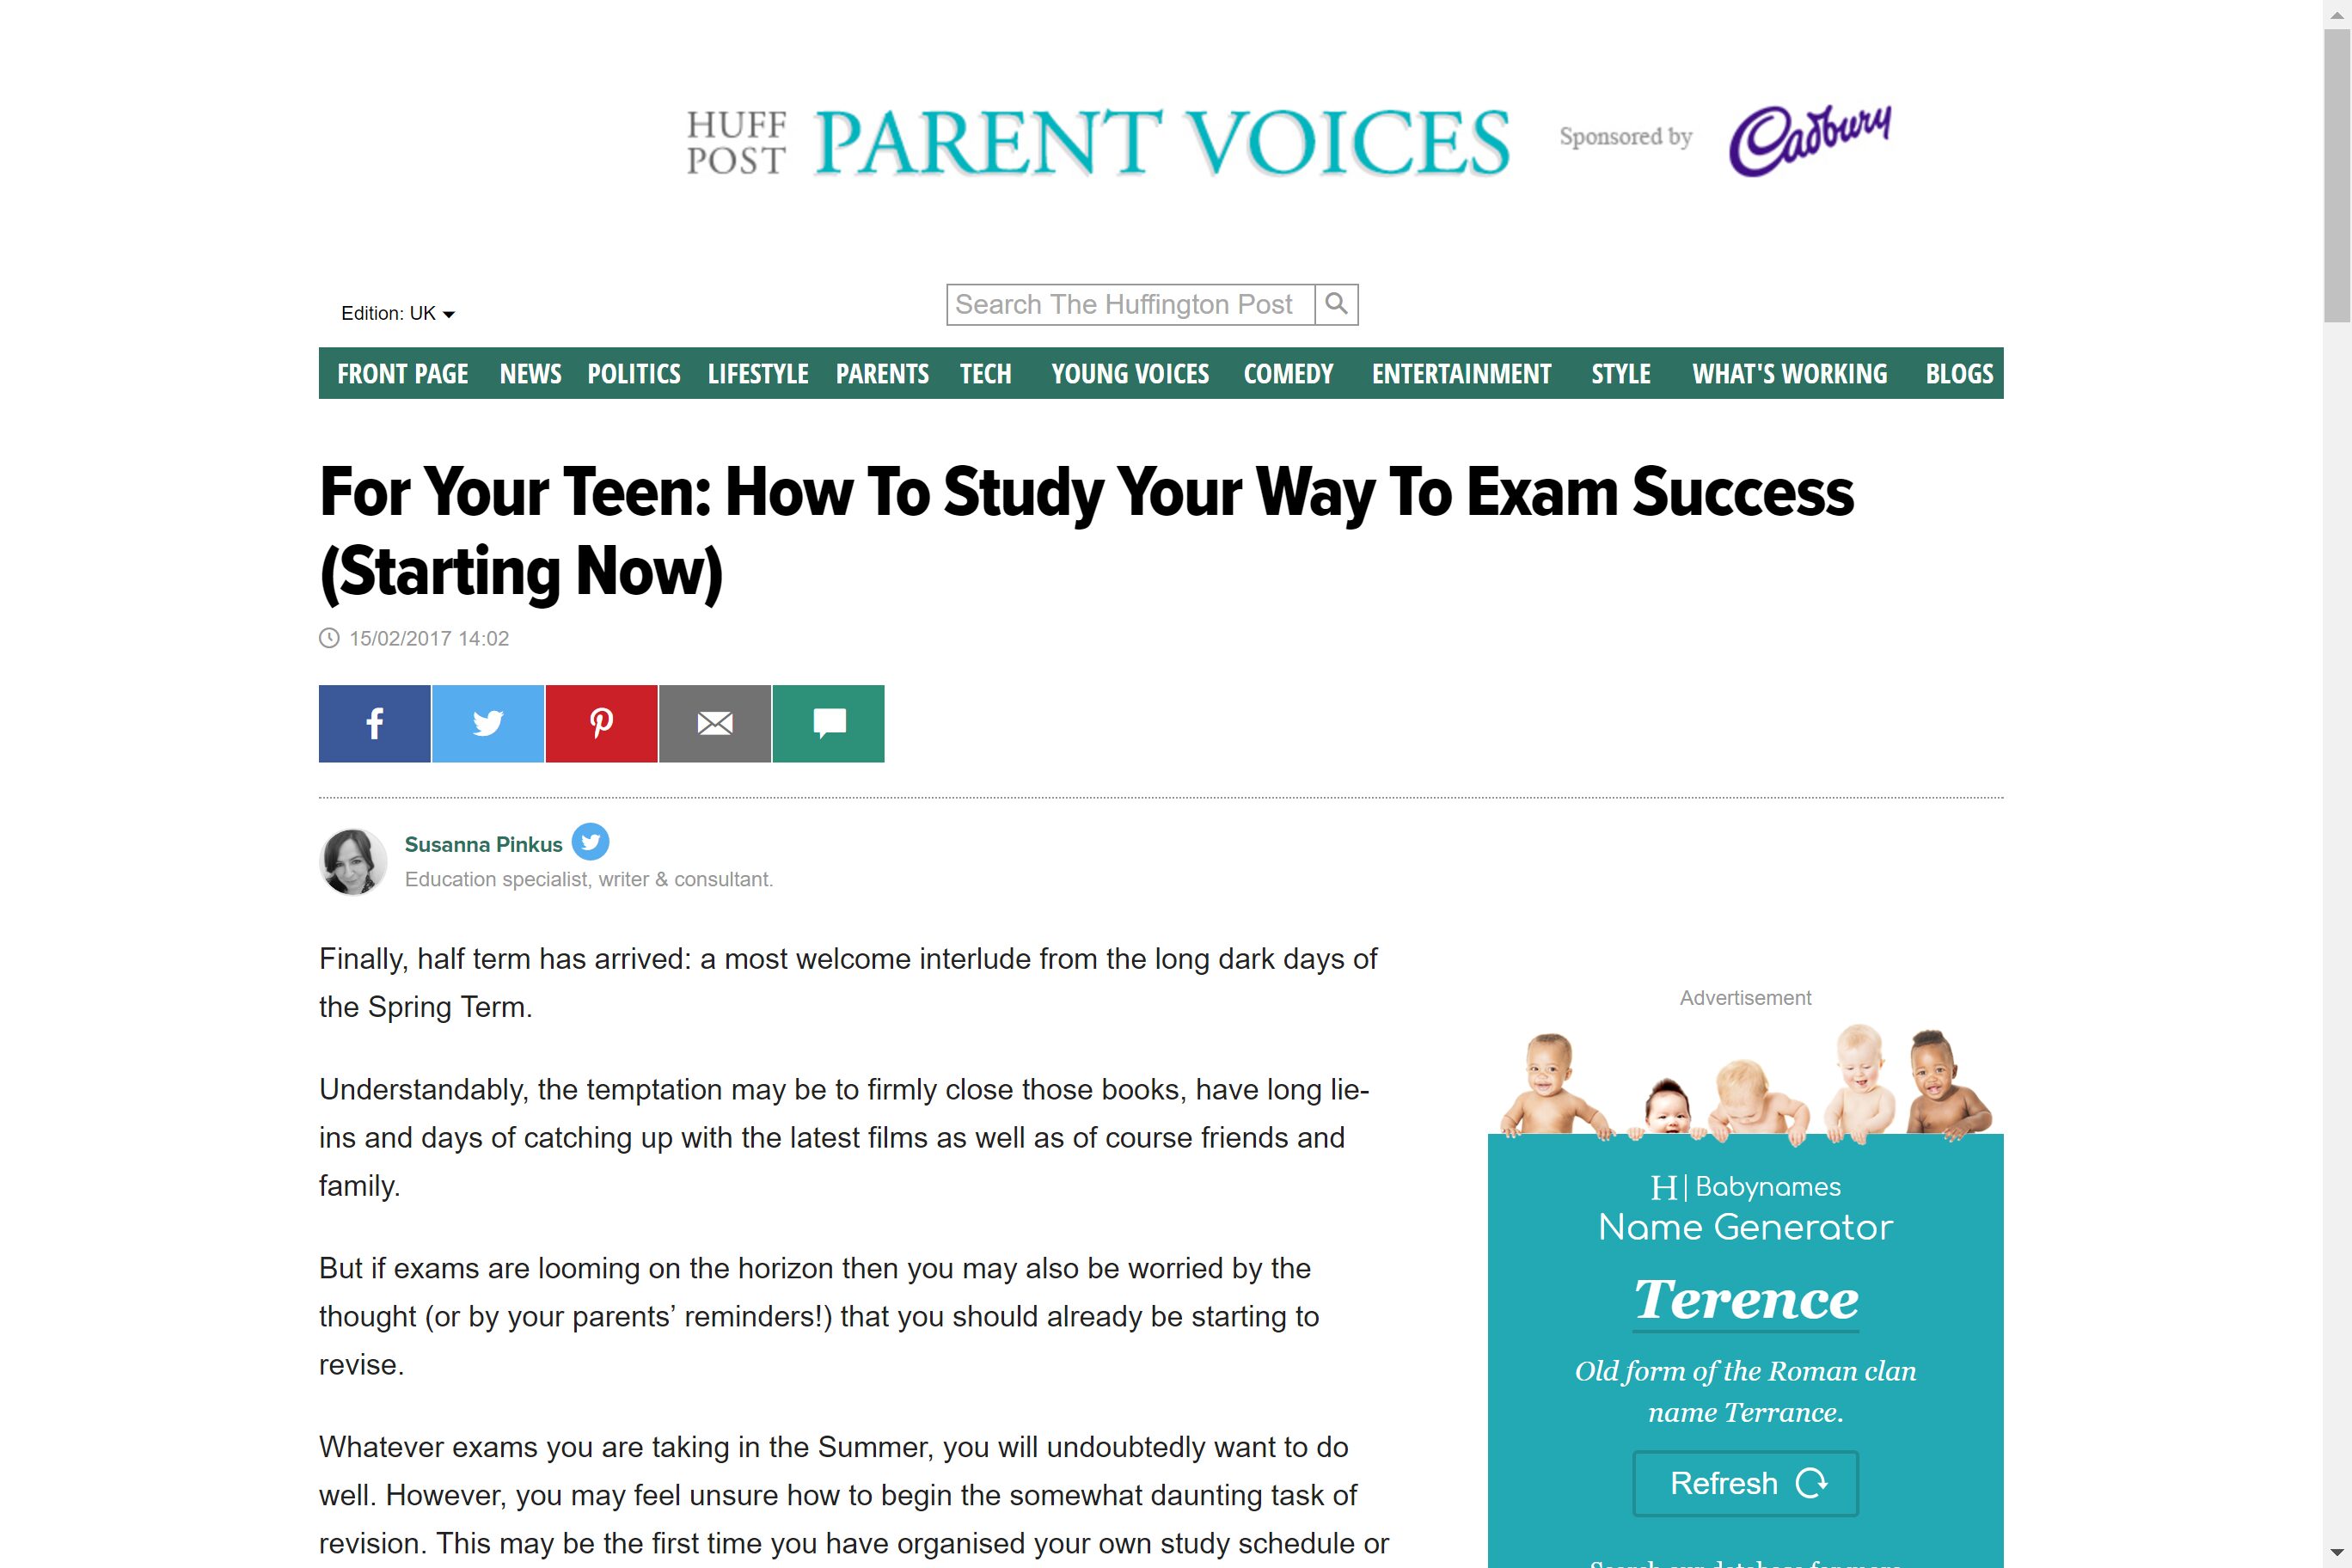 Screenshot of for your teen: how to study your way to exam success (starting now) article